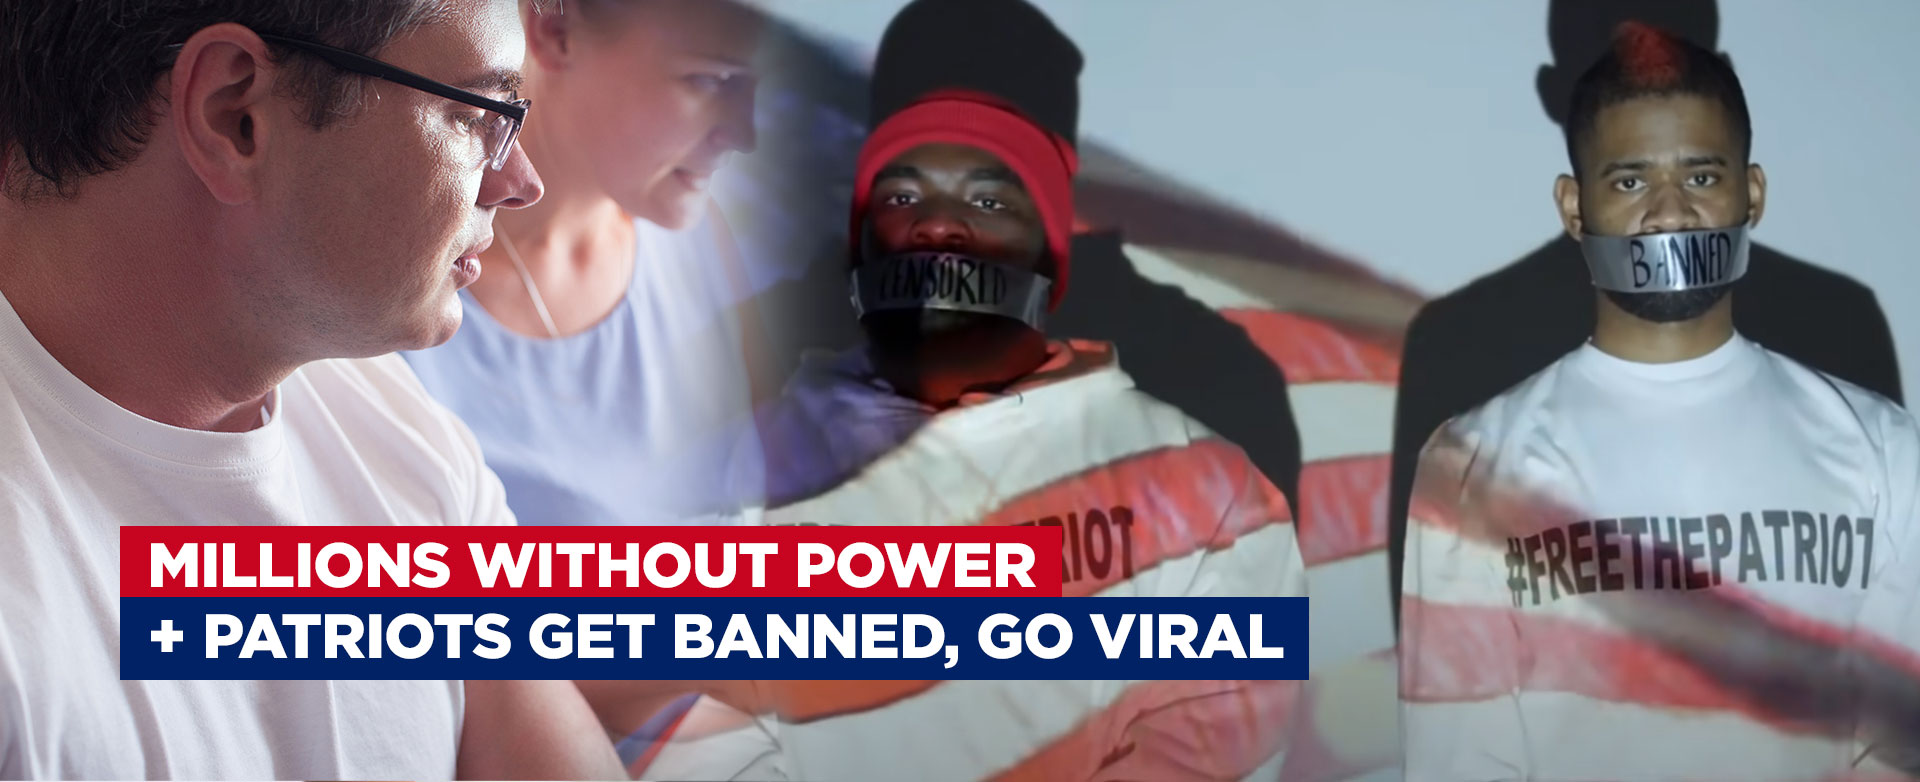 MyPatriotsNetwork-Millions Without Power Plus Banned Patriots Go Viral – February 16, 2021 Update